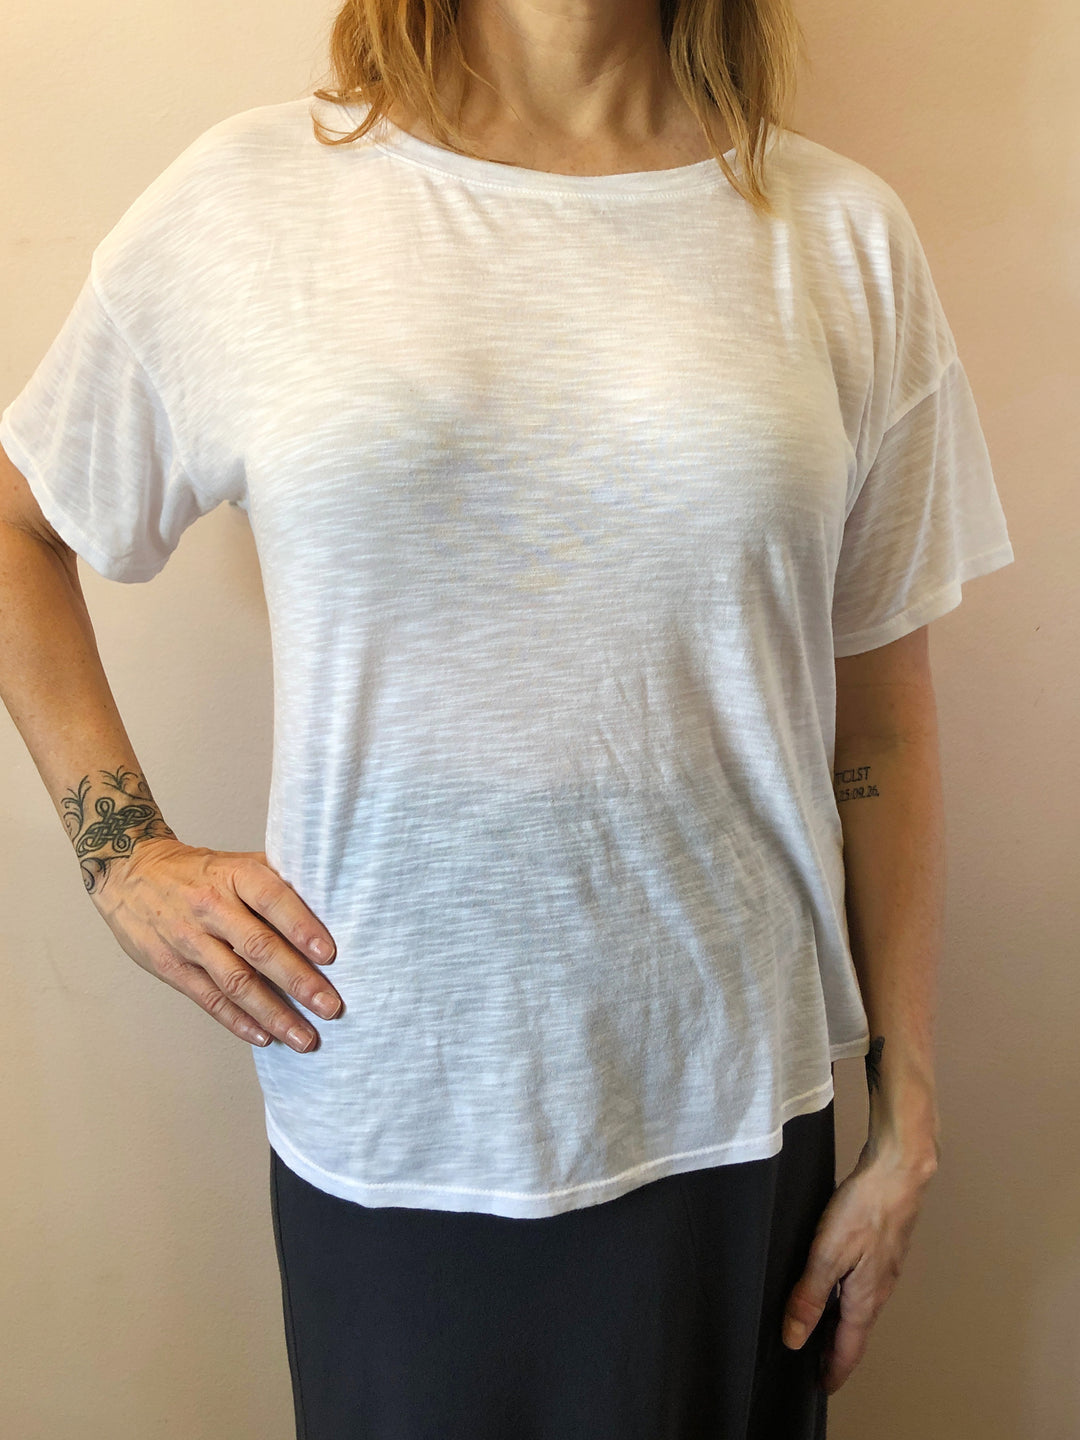 Grayson Top - White - Kingfisher Road - Online Boutique